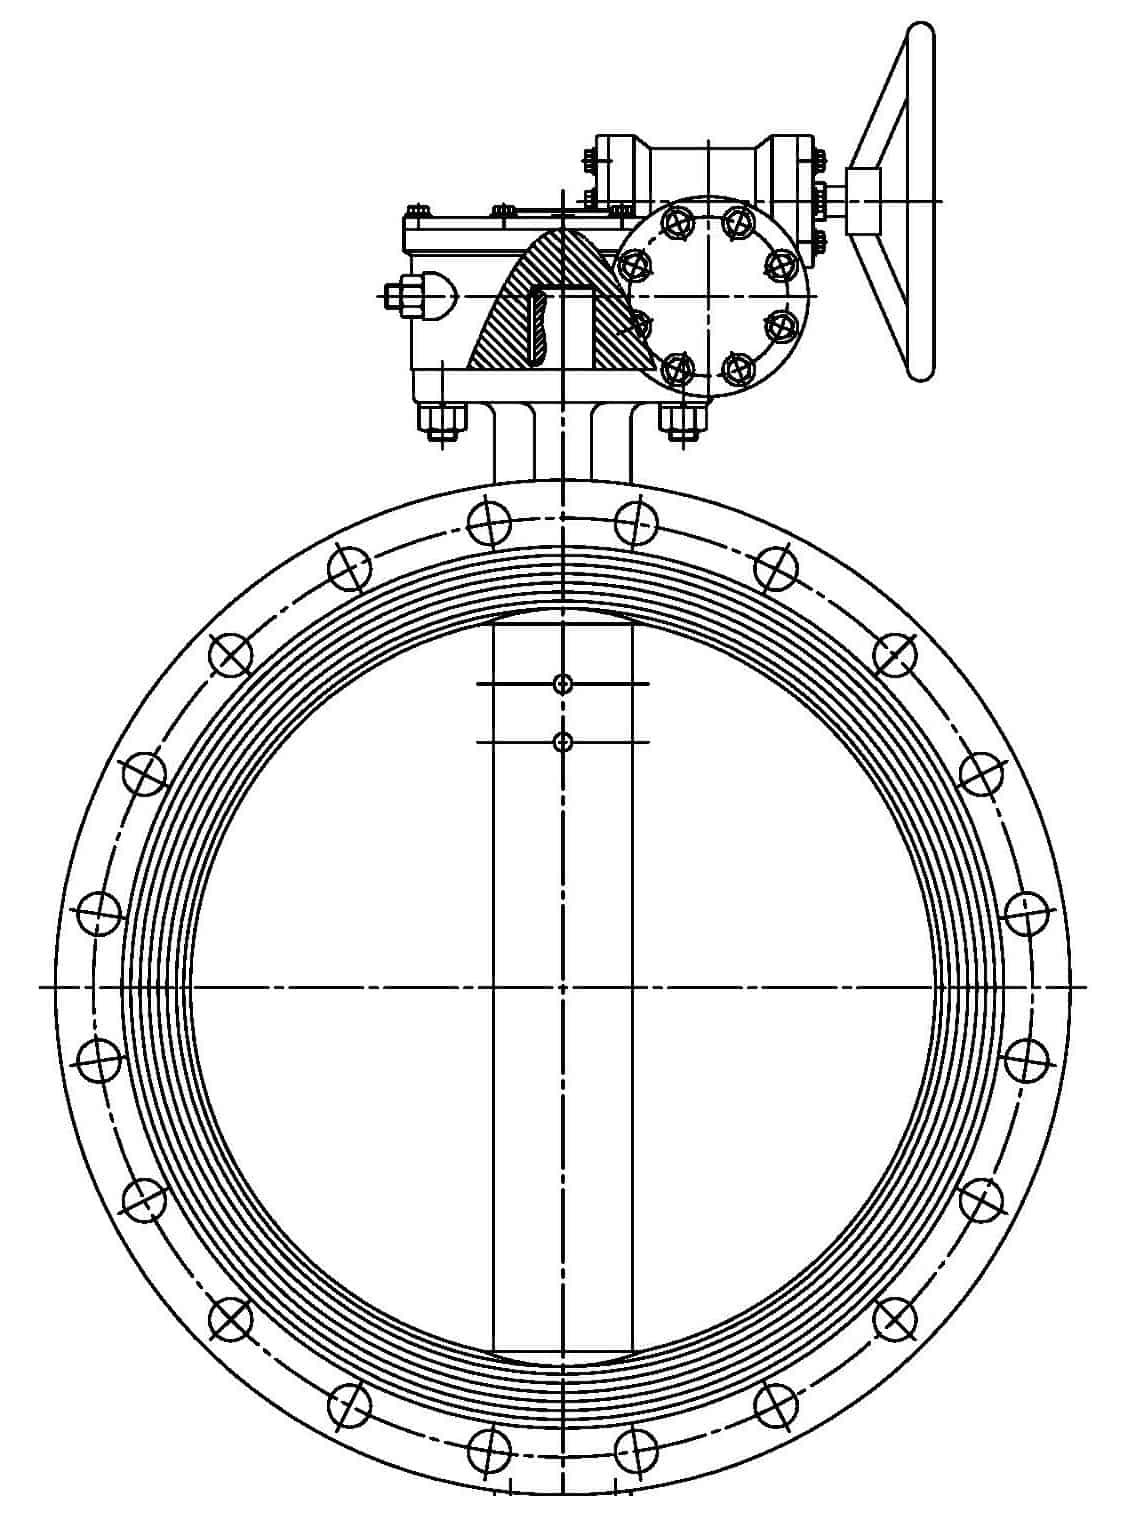 Fanged butterfly valve